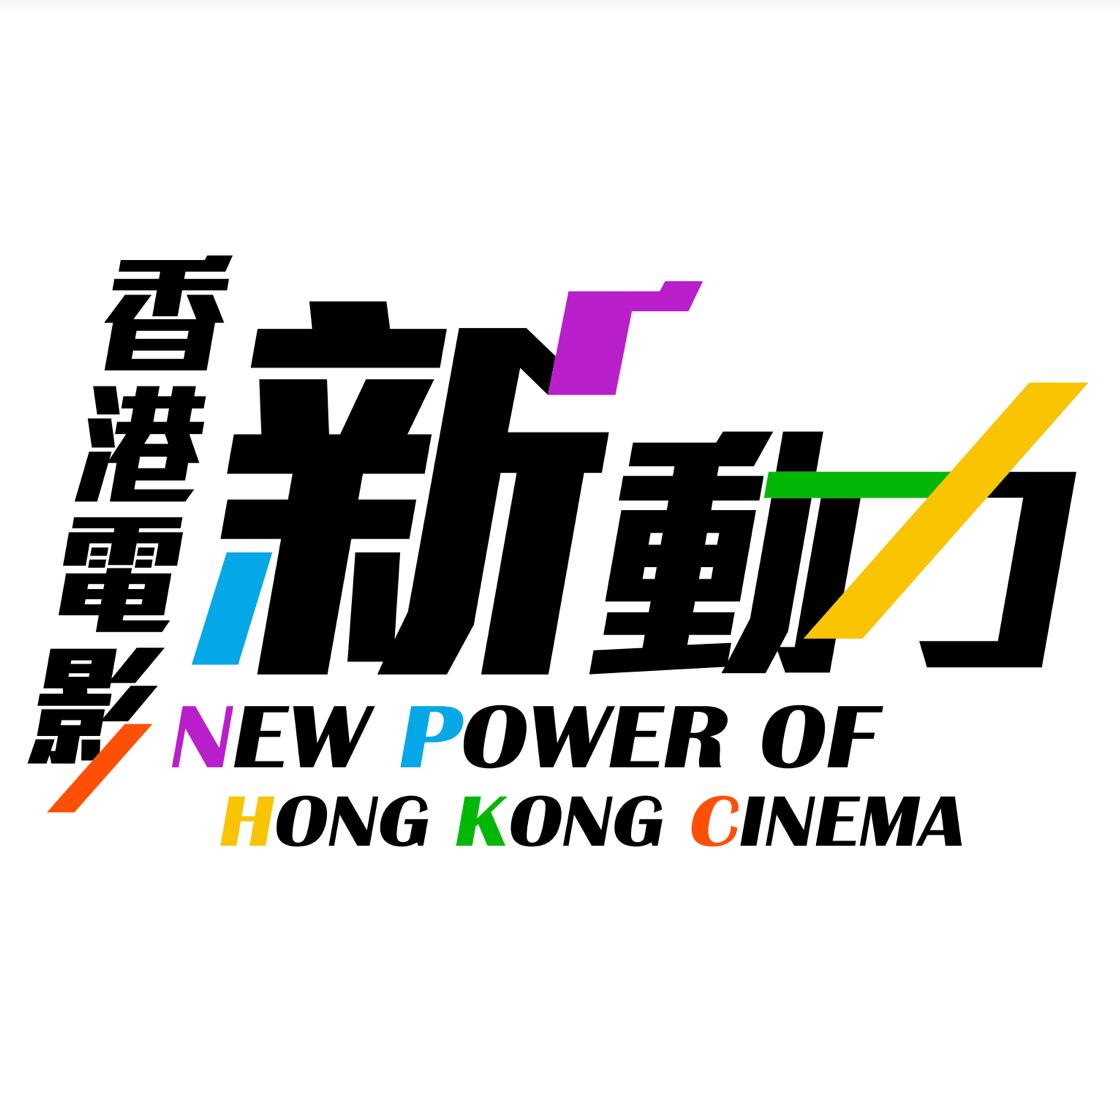 Government launches measures to inject new power into Hong Kong cinema